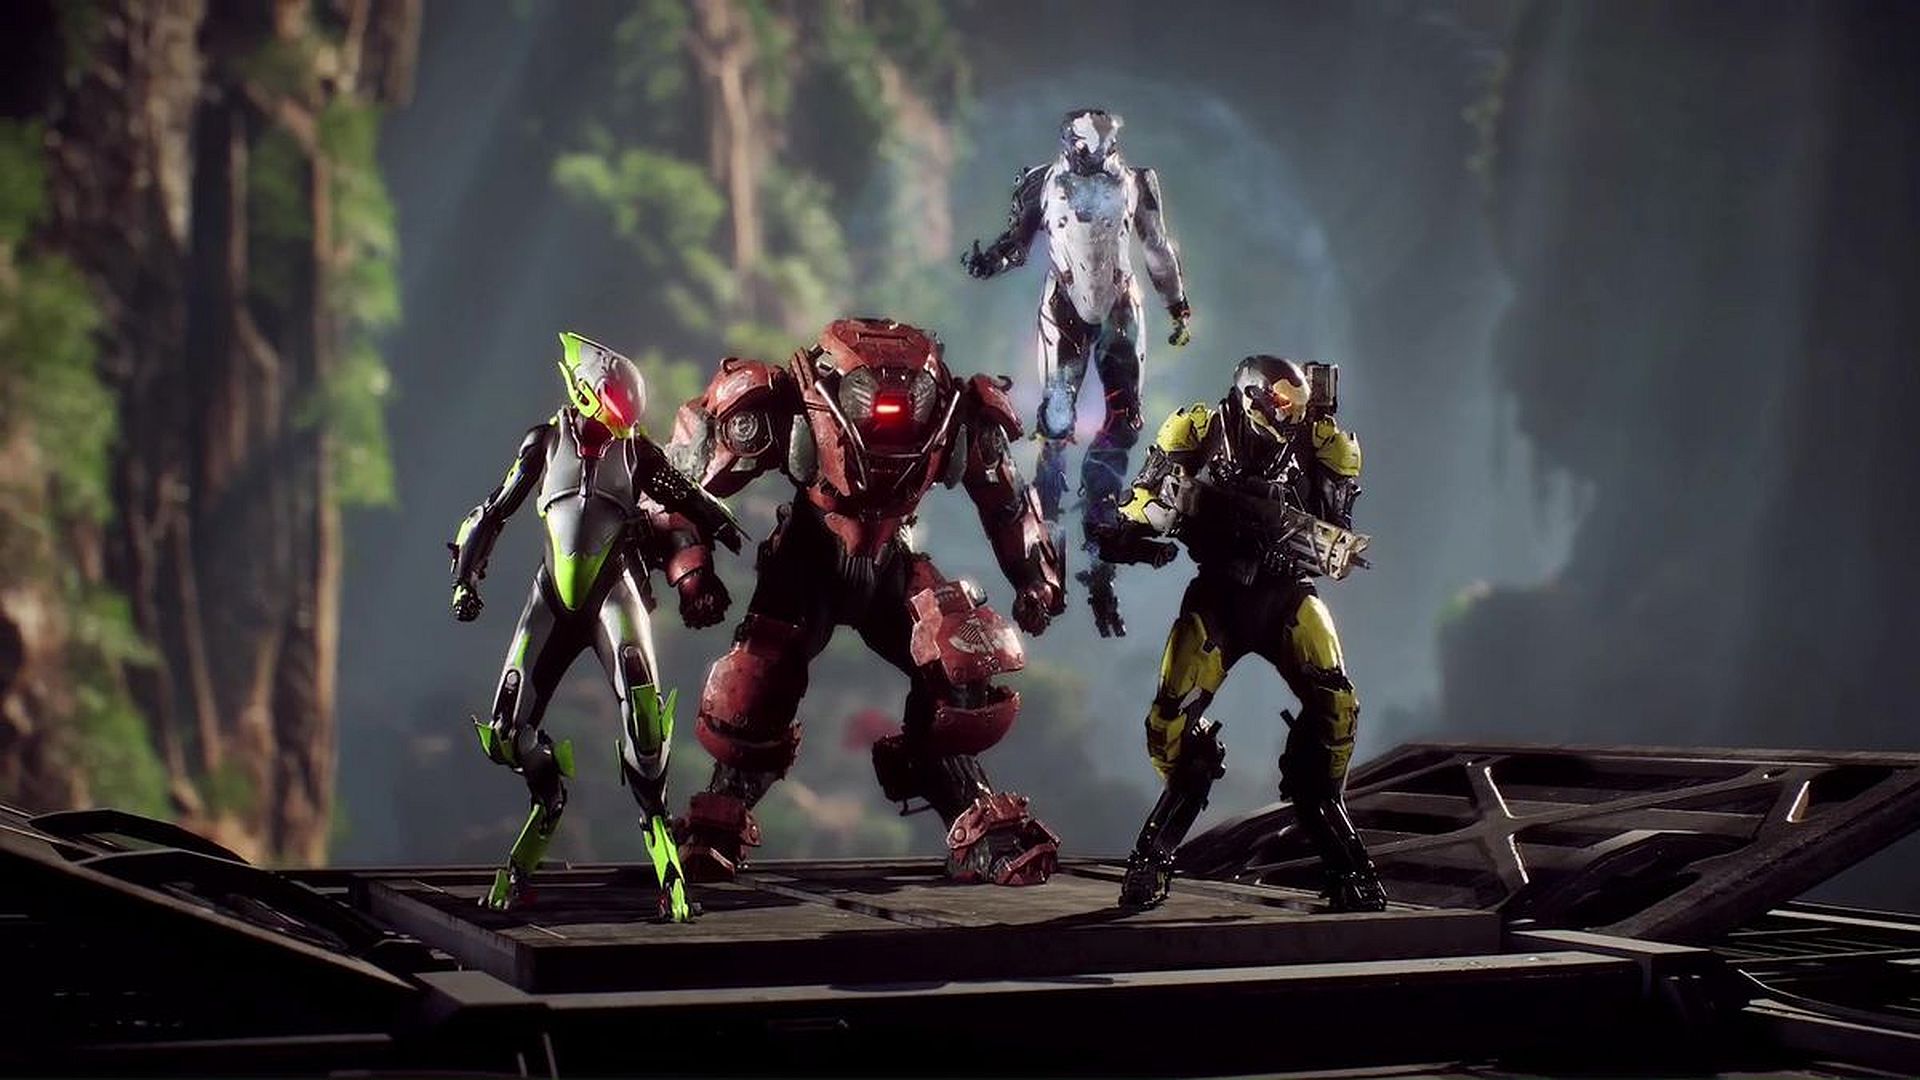 how to play anthem early on pc, xbox one and ps4